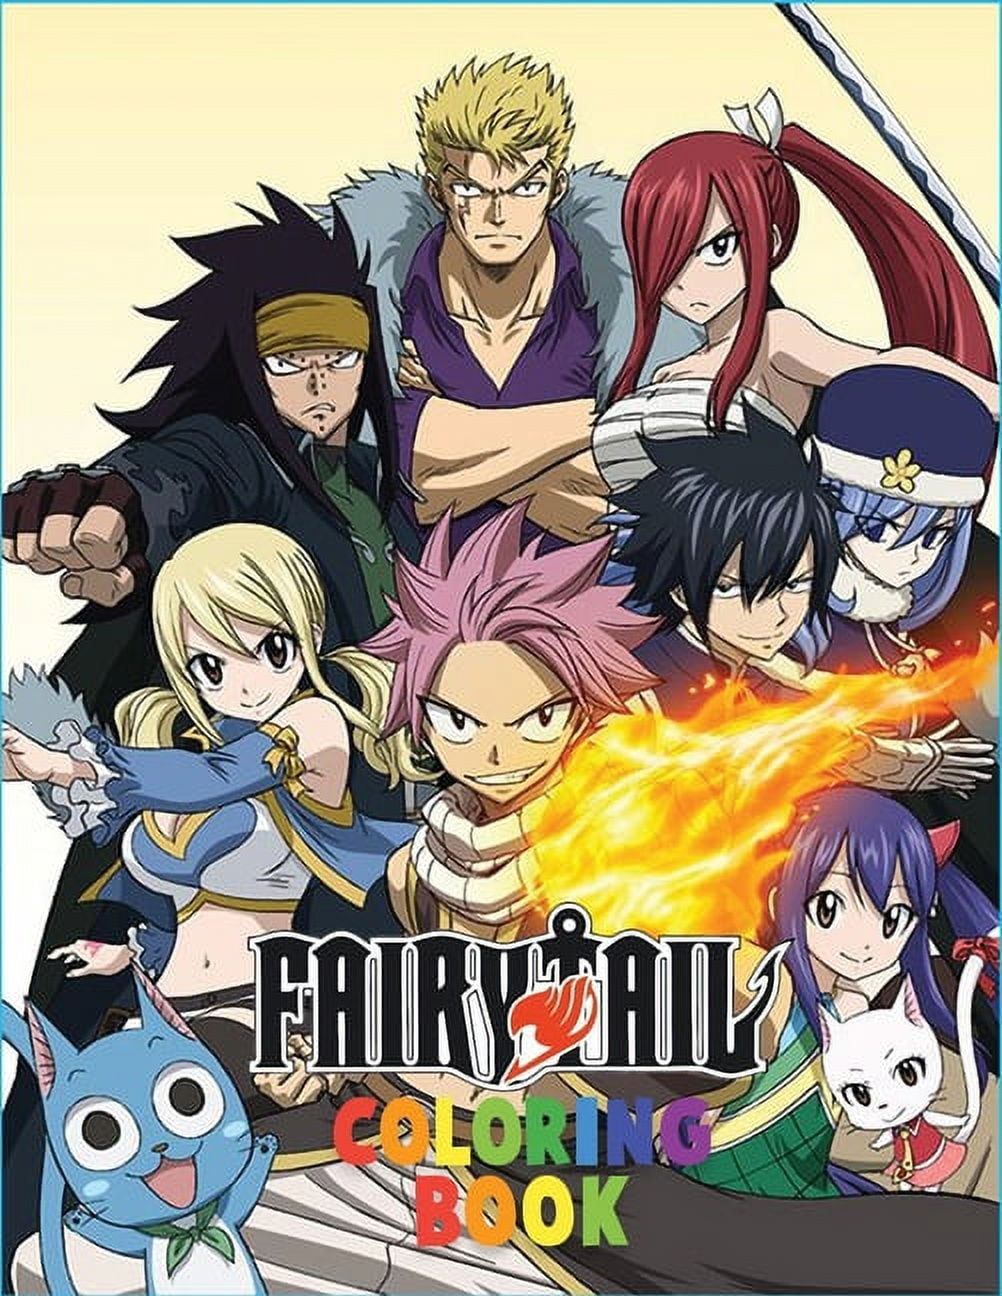 Read Manga Online for Free  Fairy tail anime, Fairy tail images, Fairy tail  manga